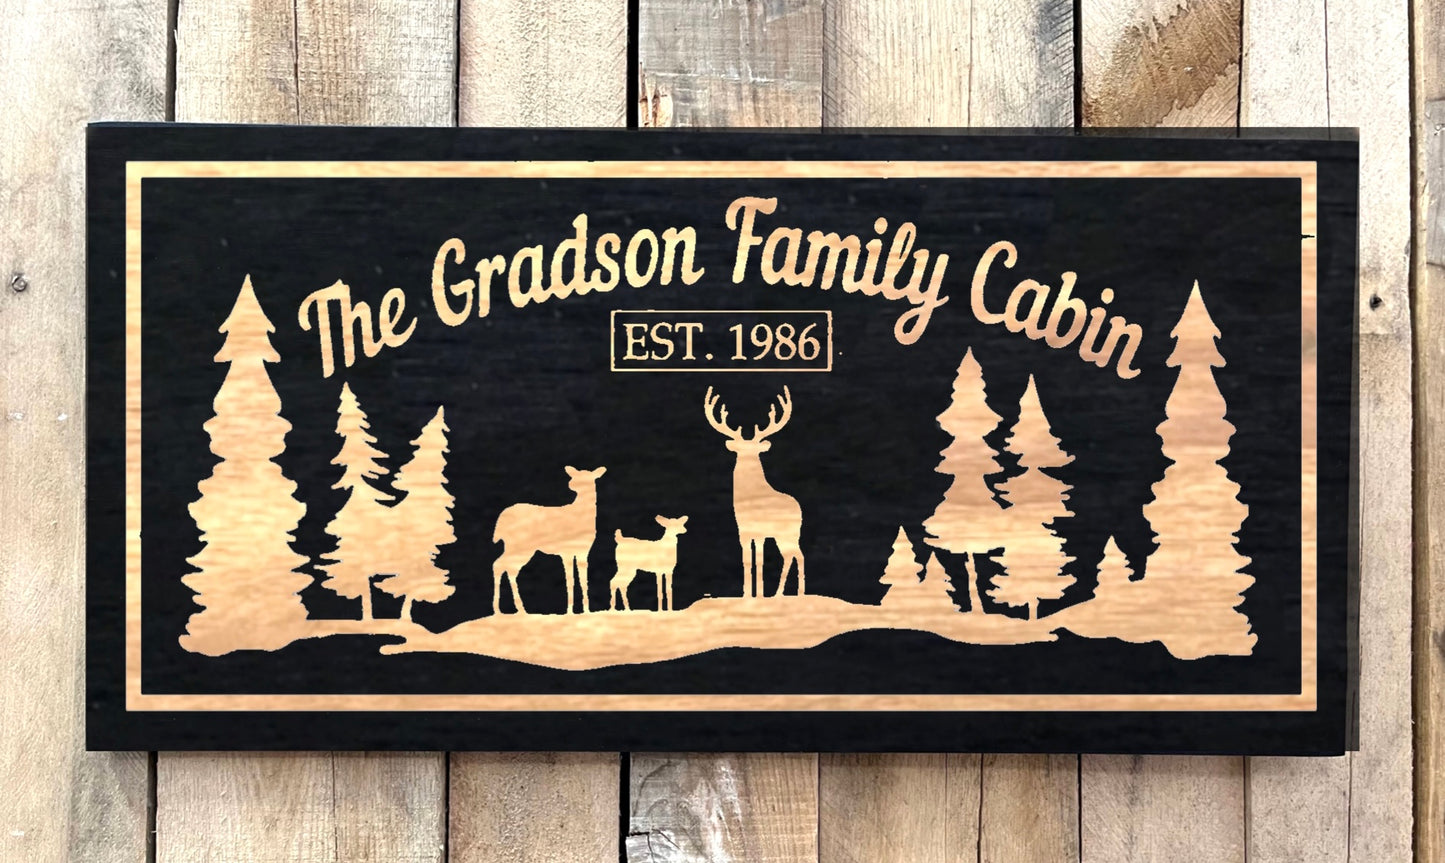 12” x 24” Black Wood Sign - Family Cabin